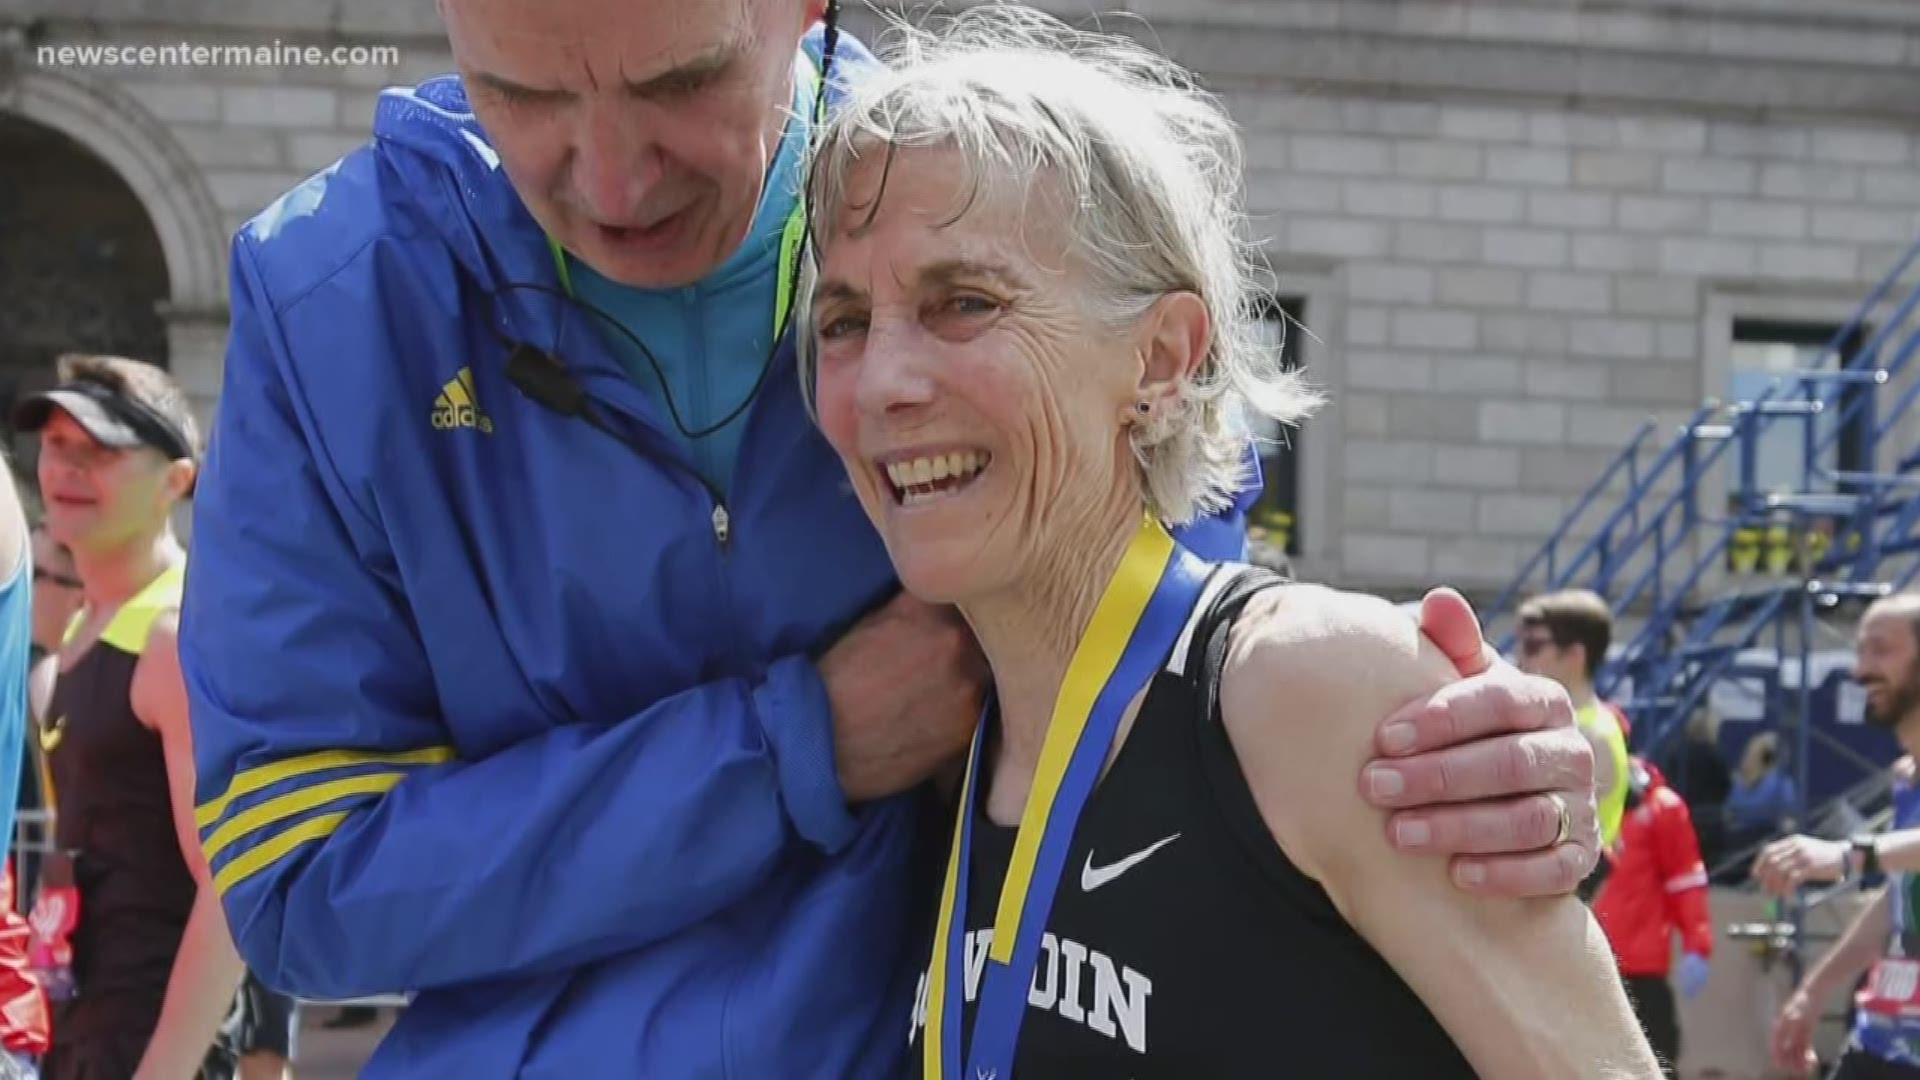 Maine's historic runner Joan Benoit Samuelson completed the Boston Marathon on Monday, just 30 minutes slower than her winning time in 1979.